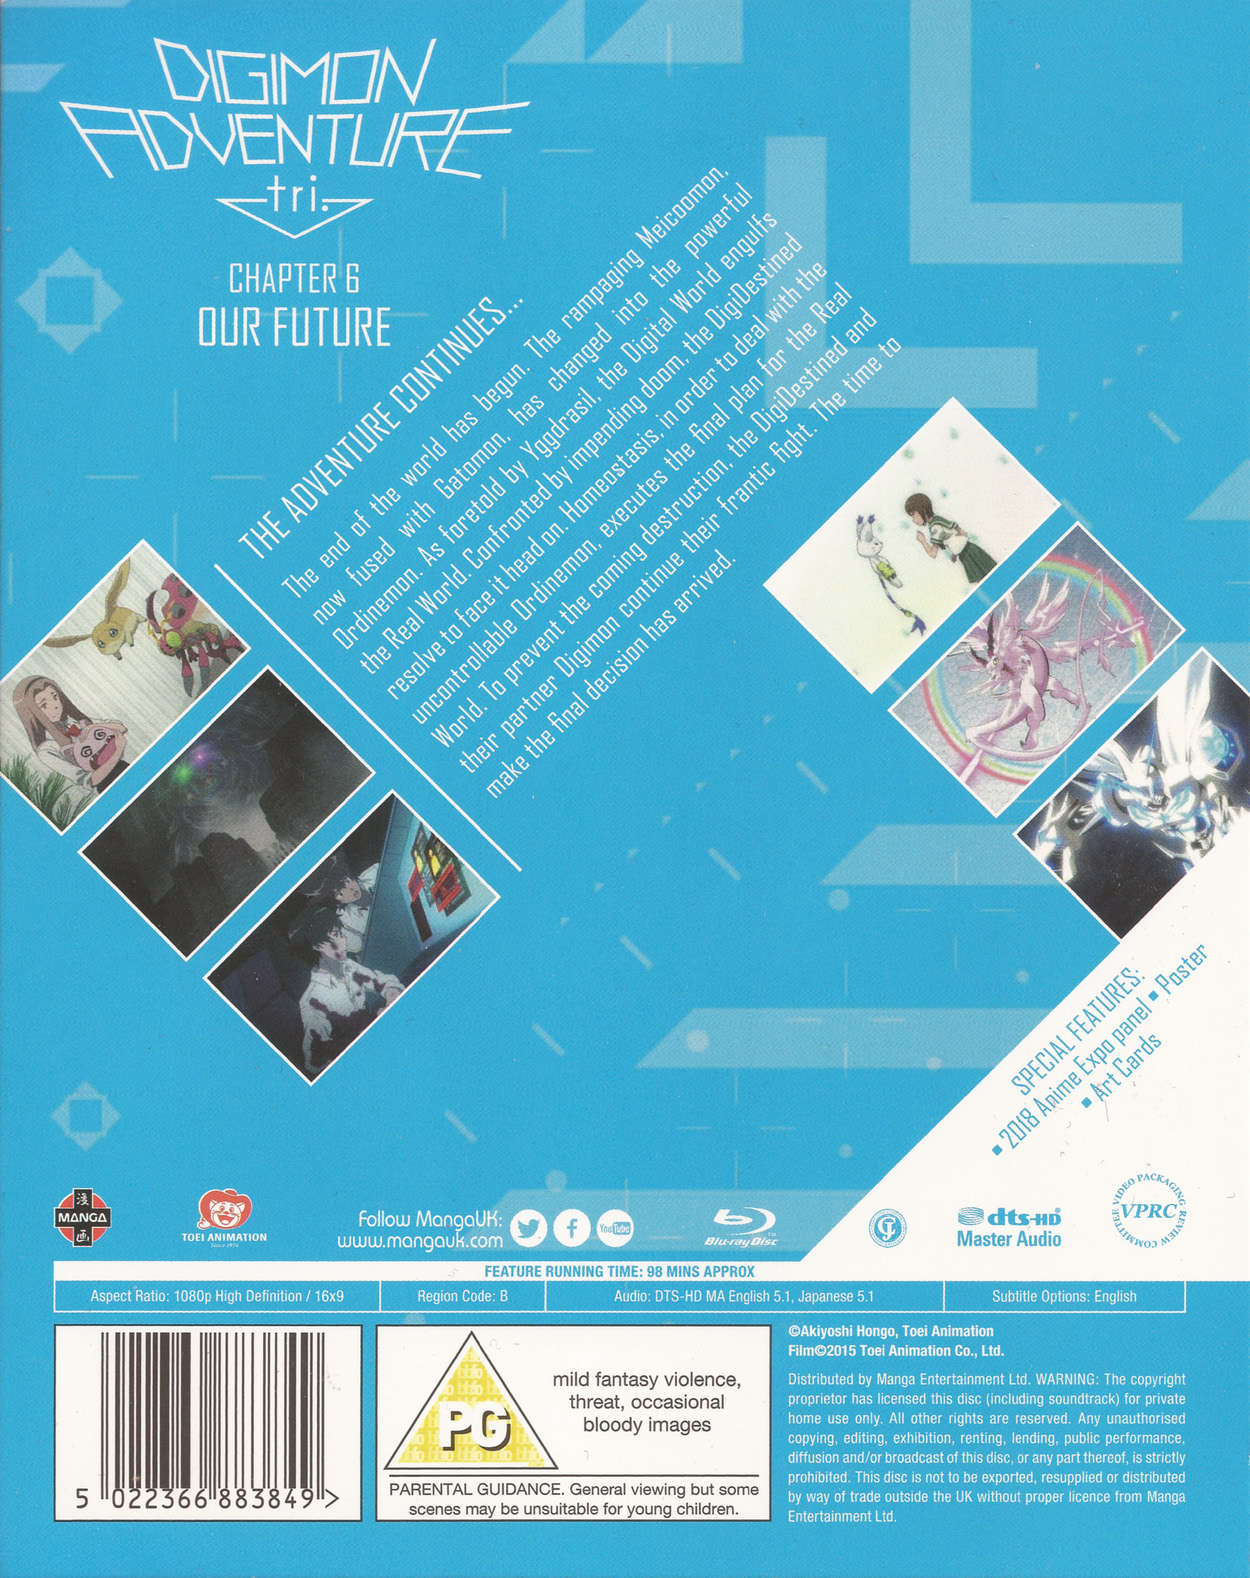 Digimon Adventure Tri 6-Film Collection Blu-Ray Set with Slipcover